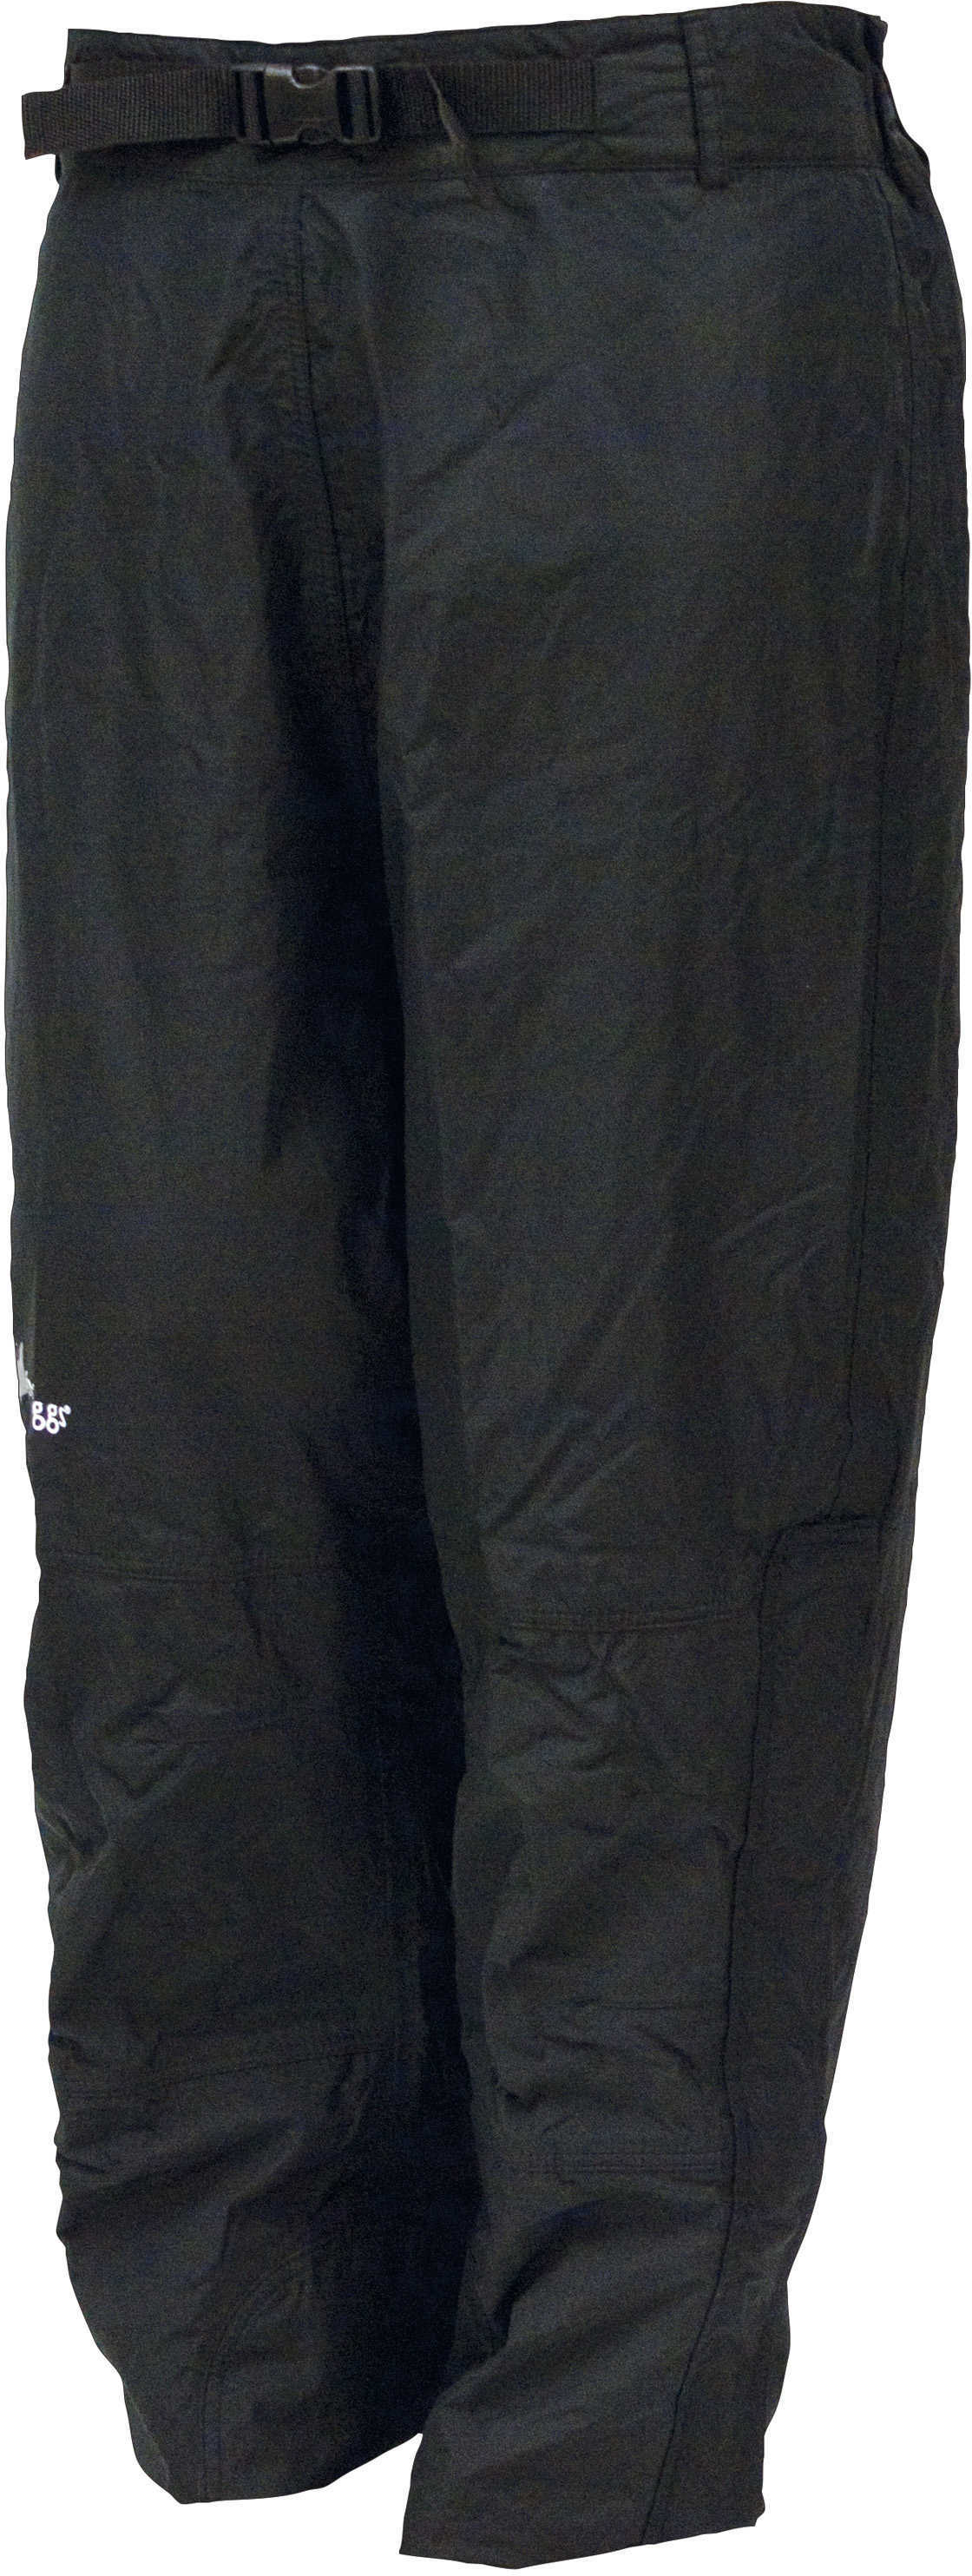 Frogg Toggs ToadSkinz Pant, Black X-Large NT8201-01XL